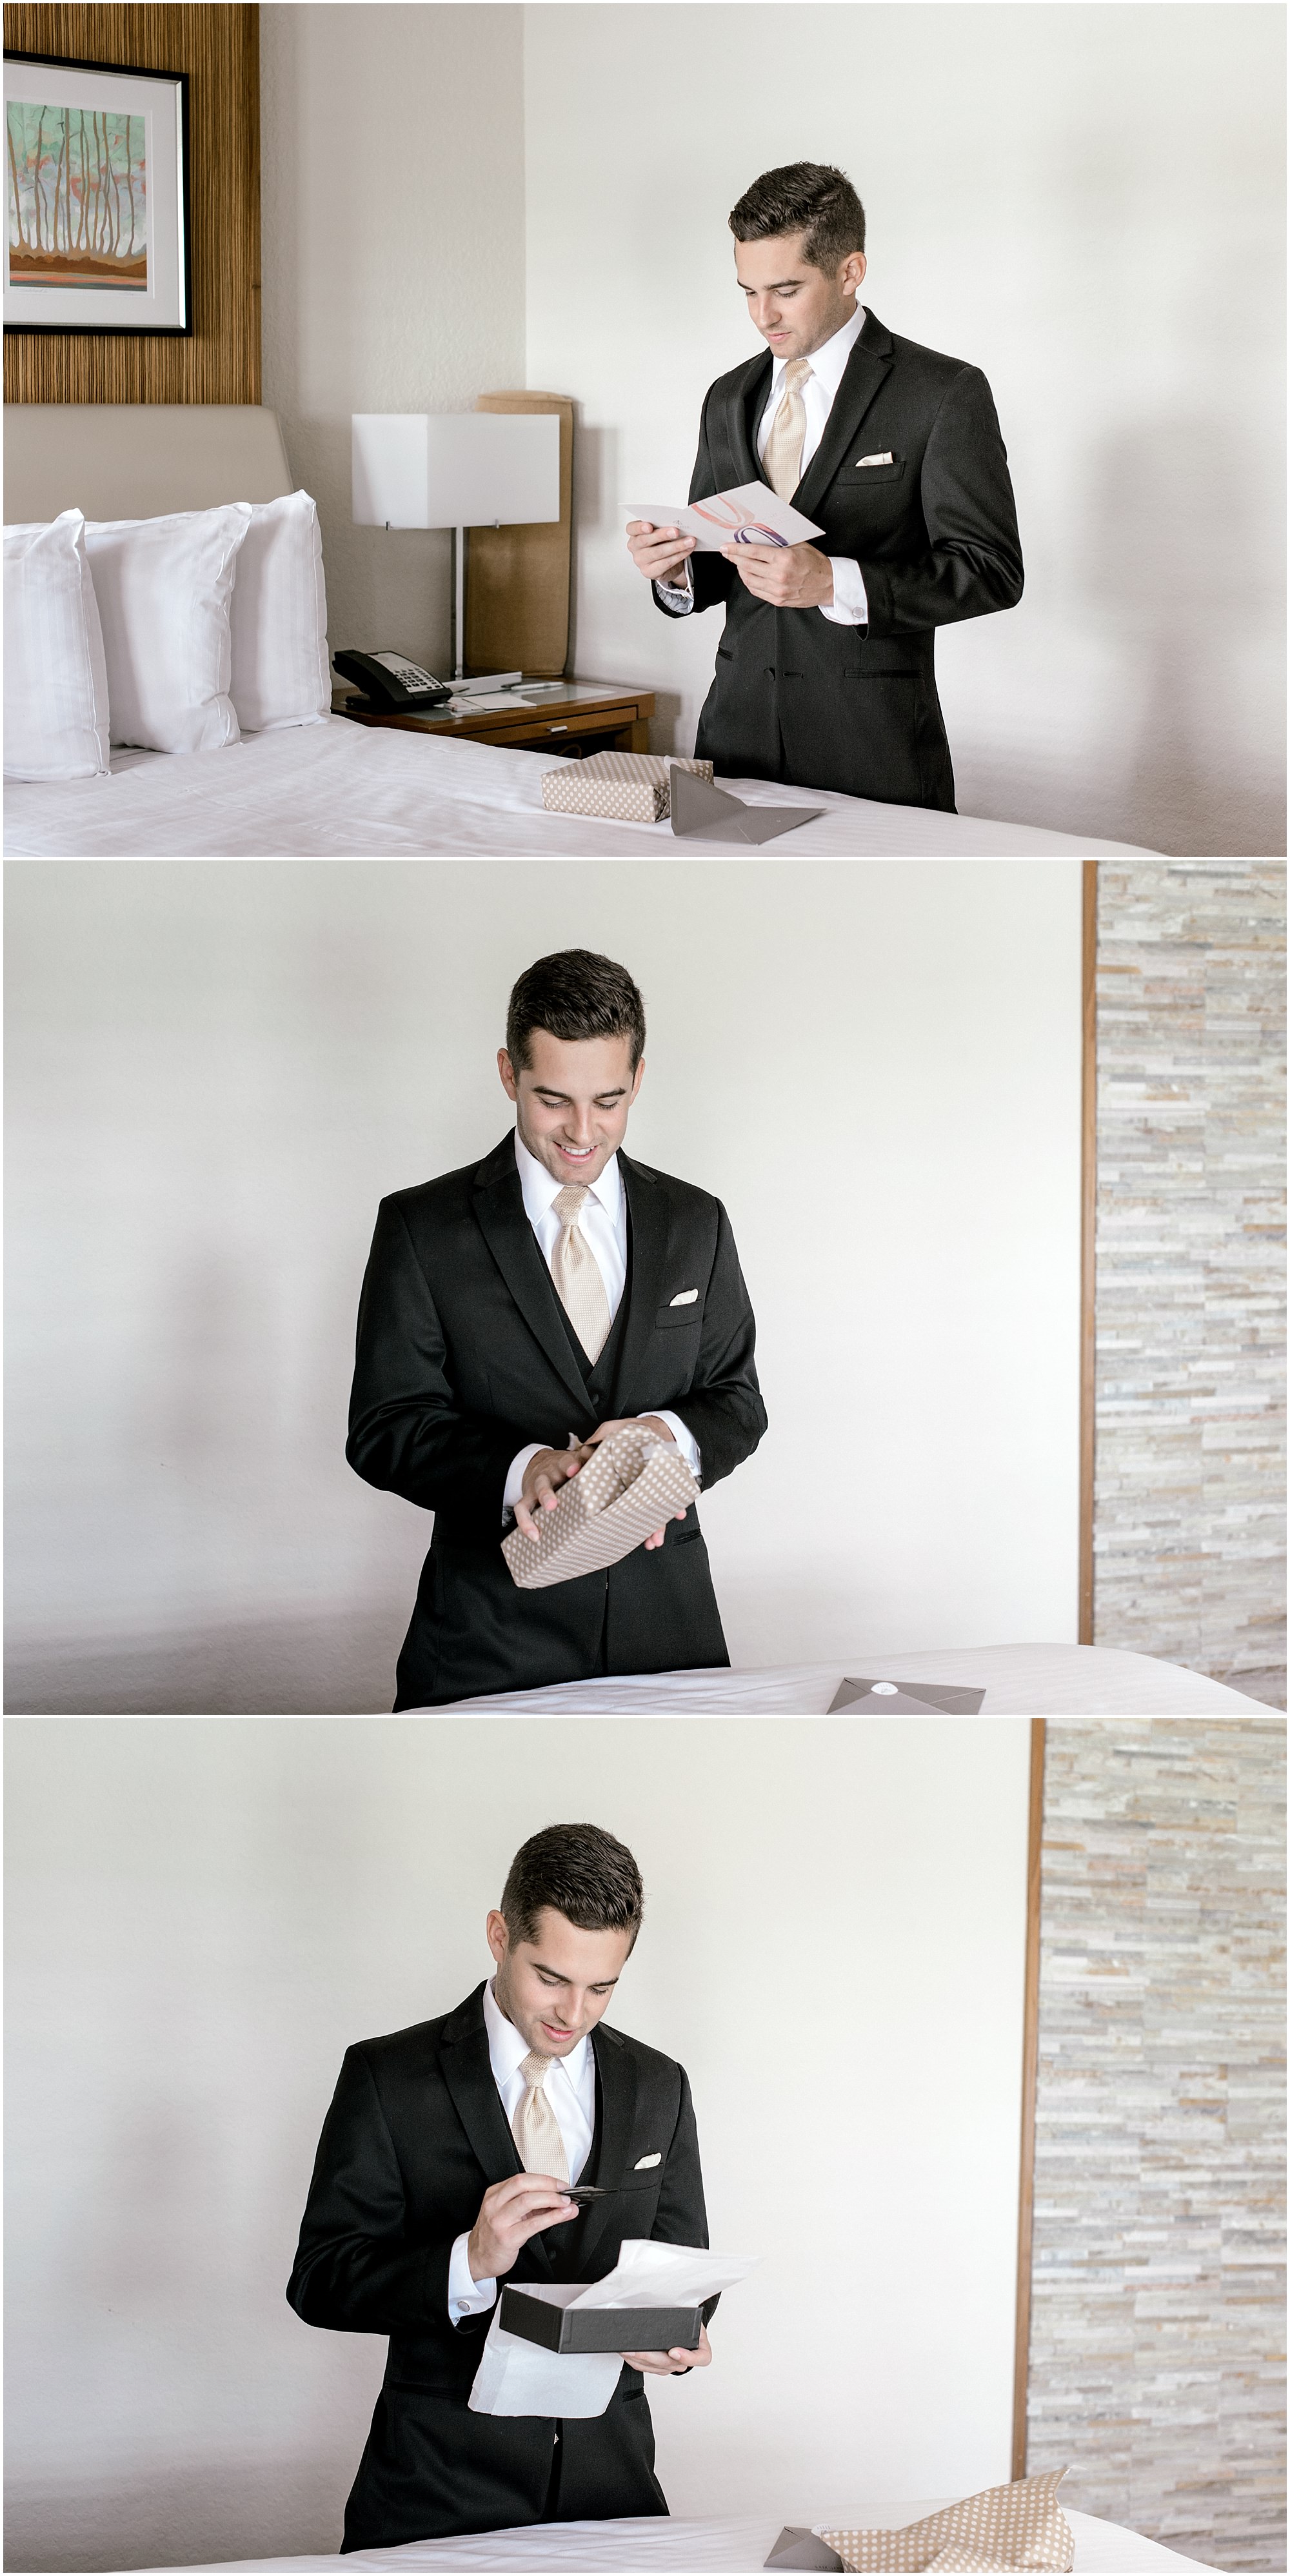 Groom opening up a gift from his bride.